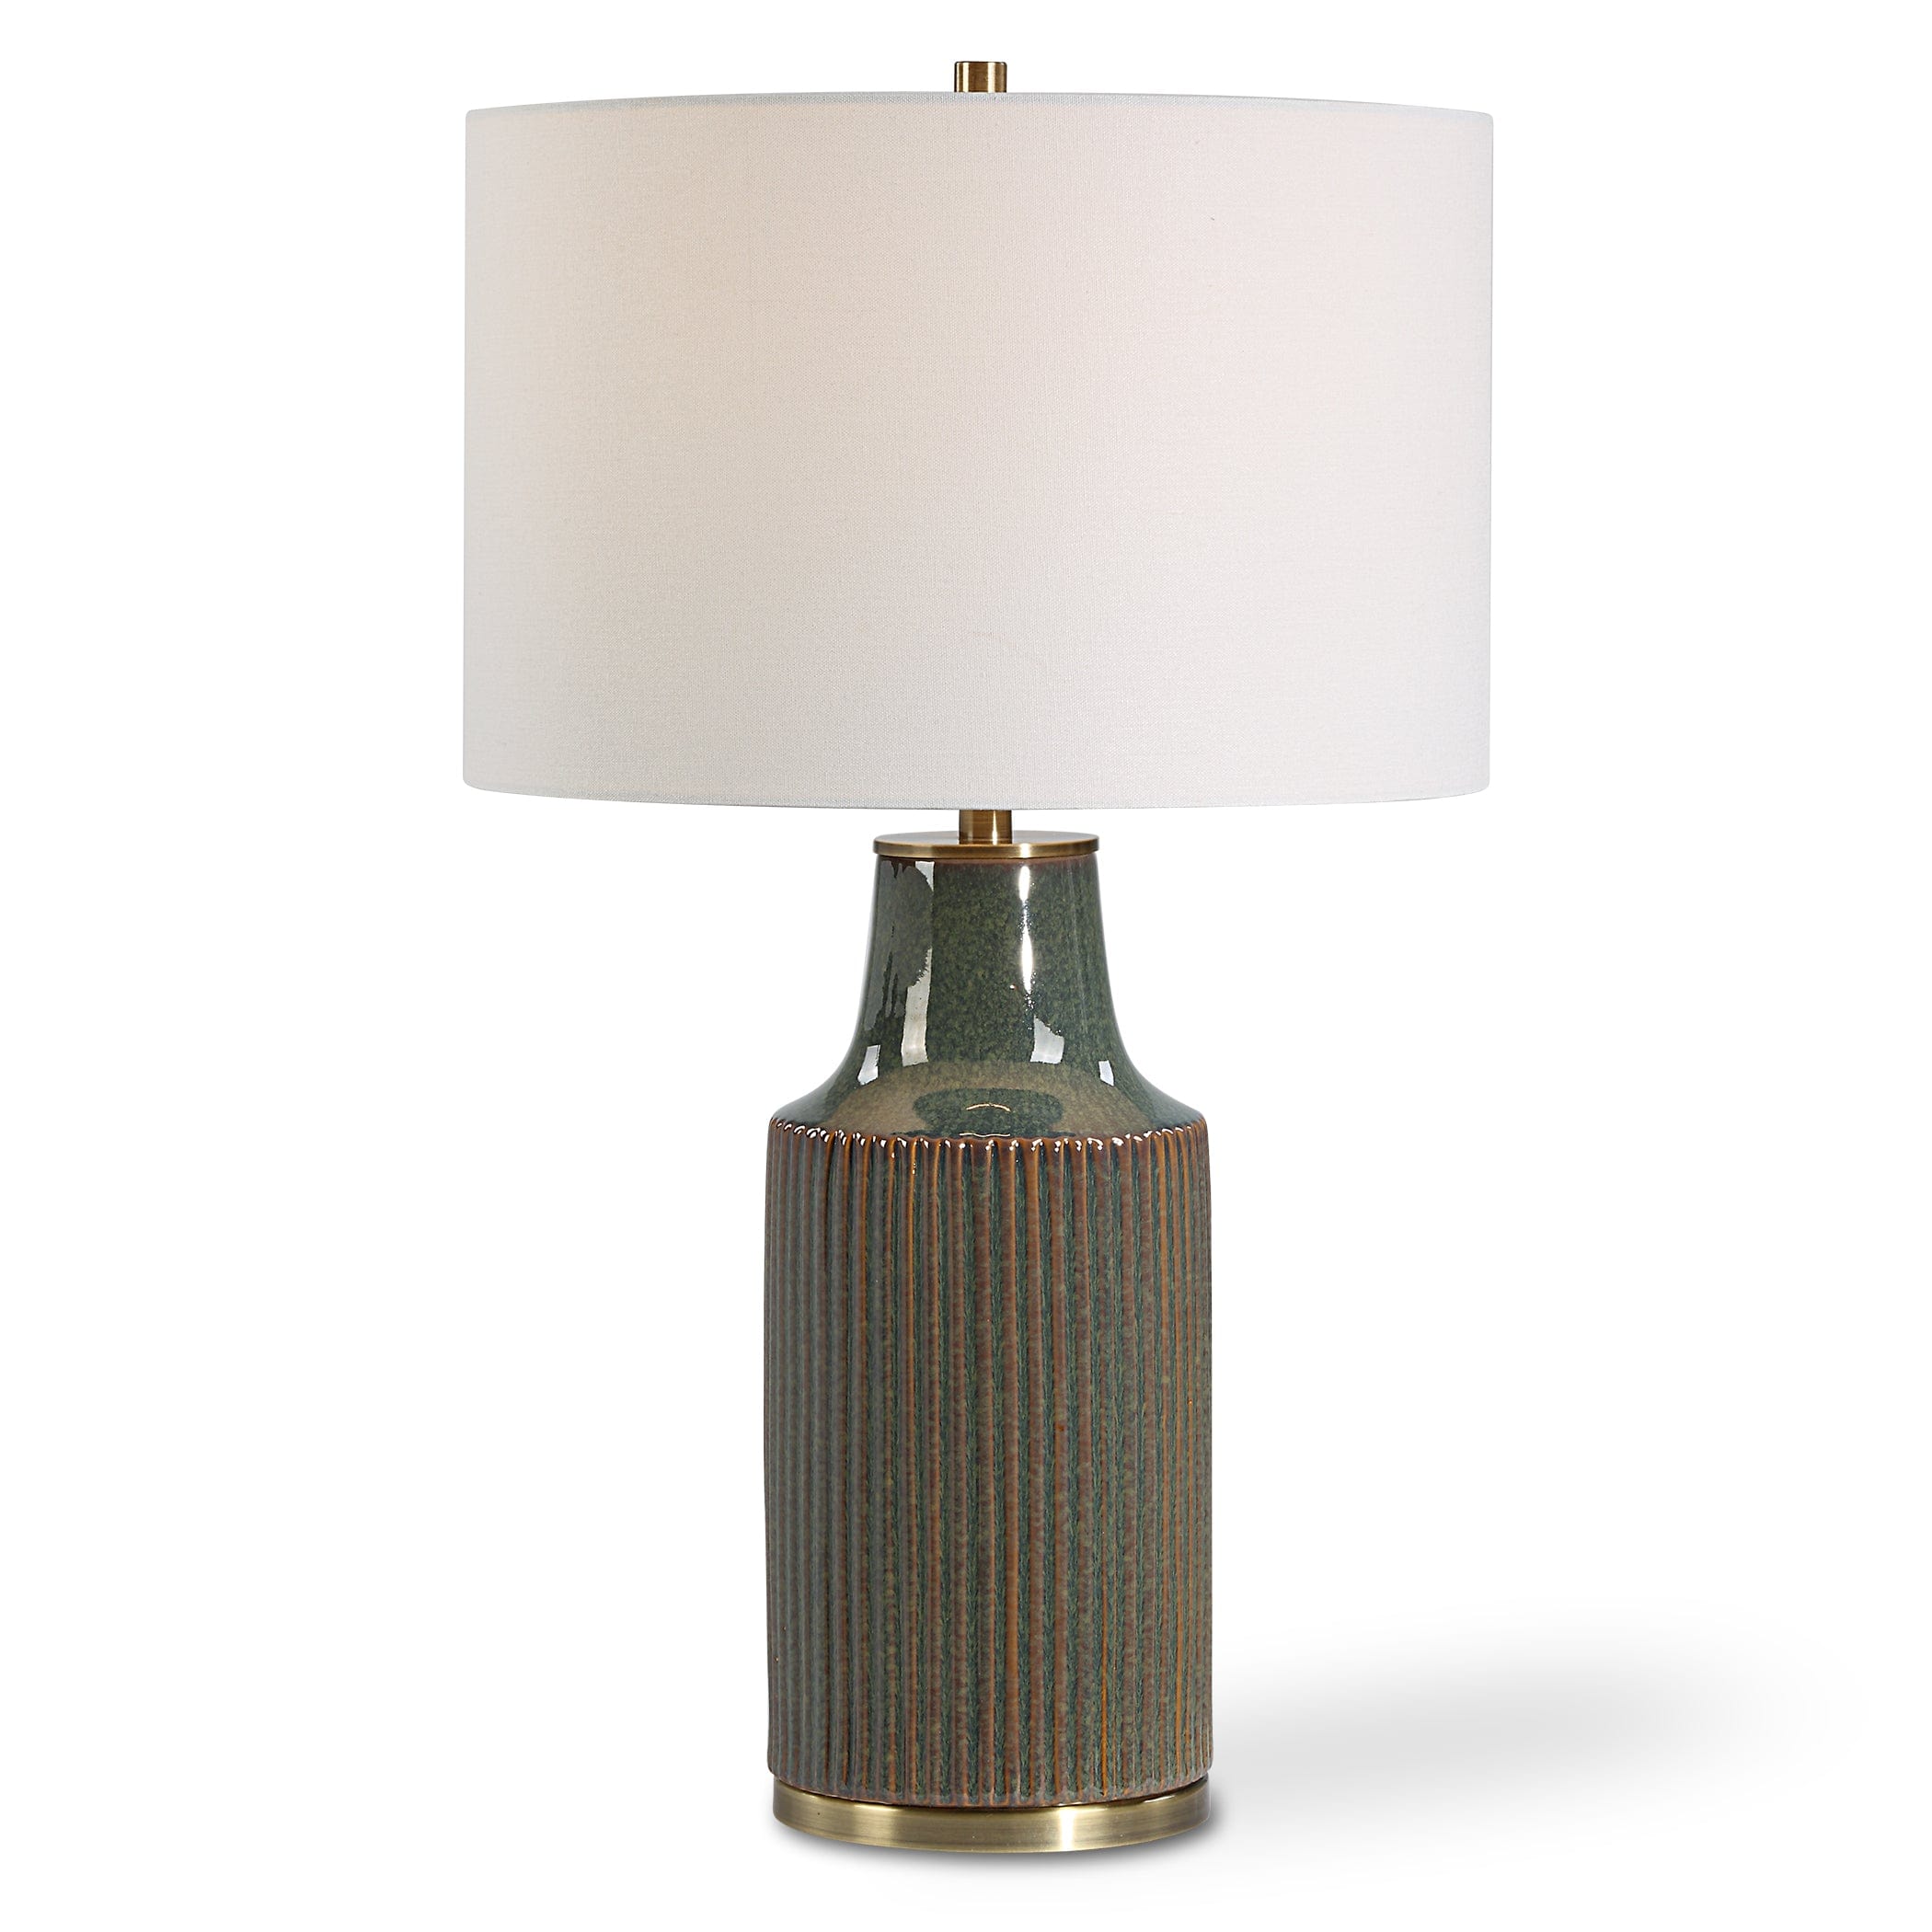 TABLE LAMP WL-16 Uttermost